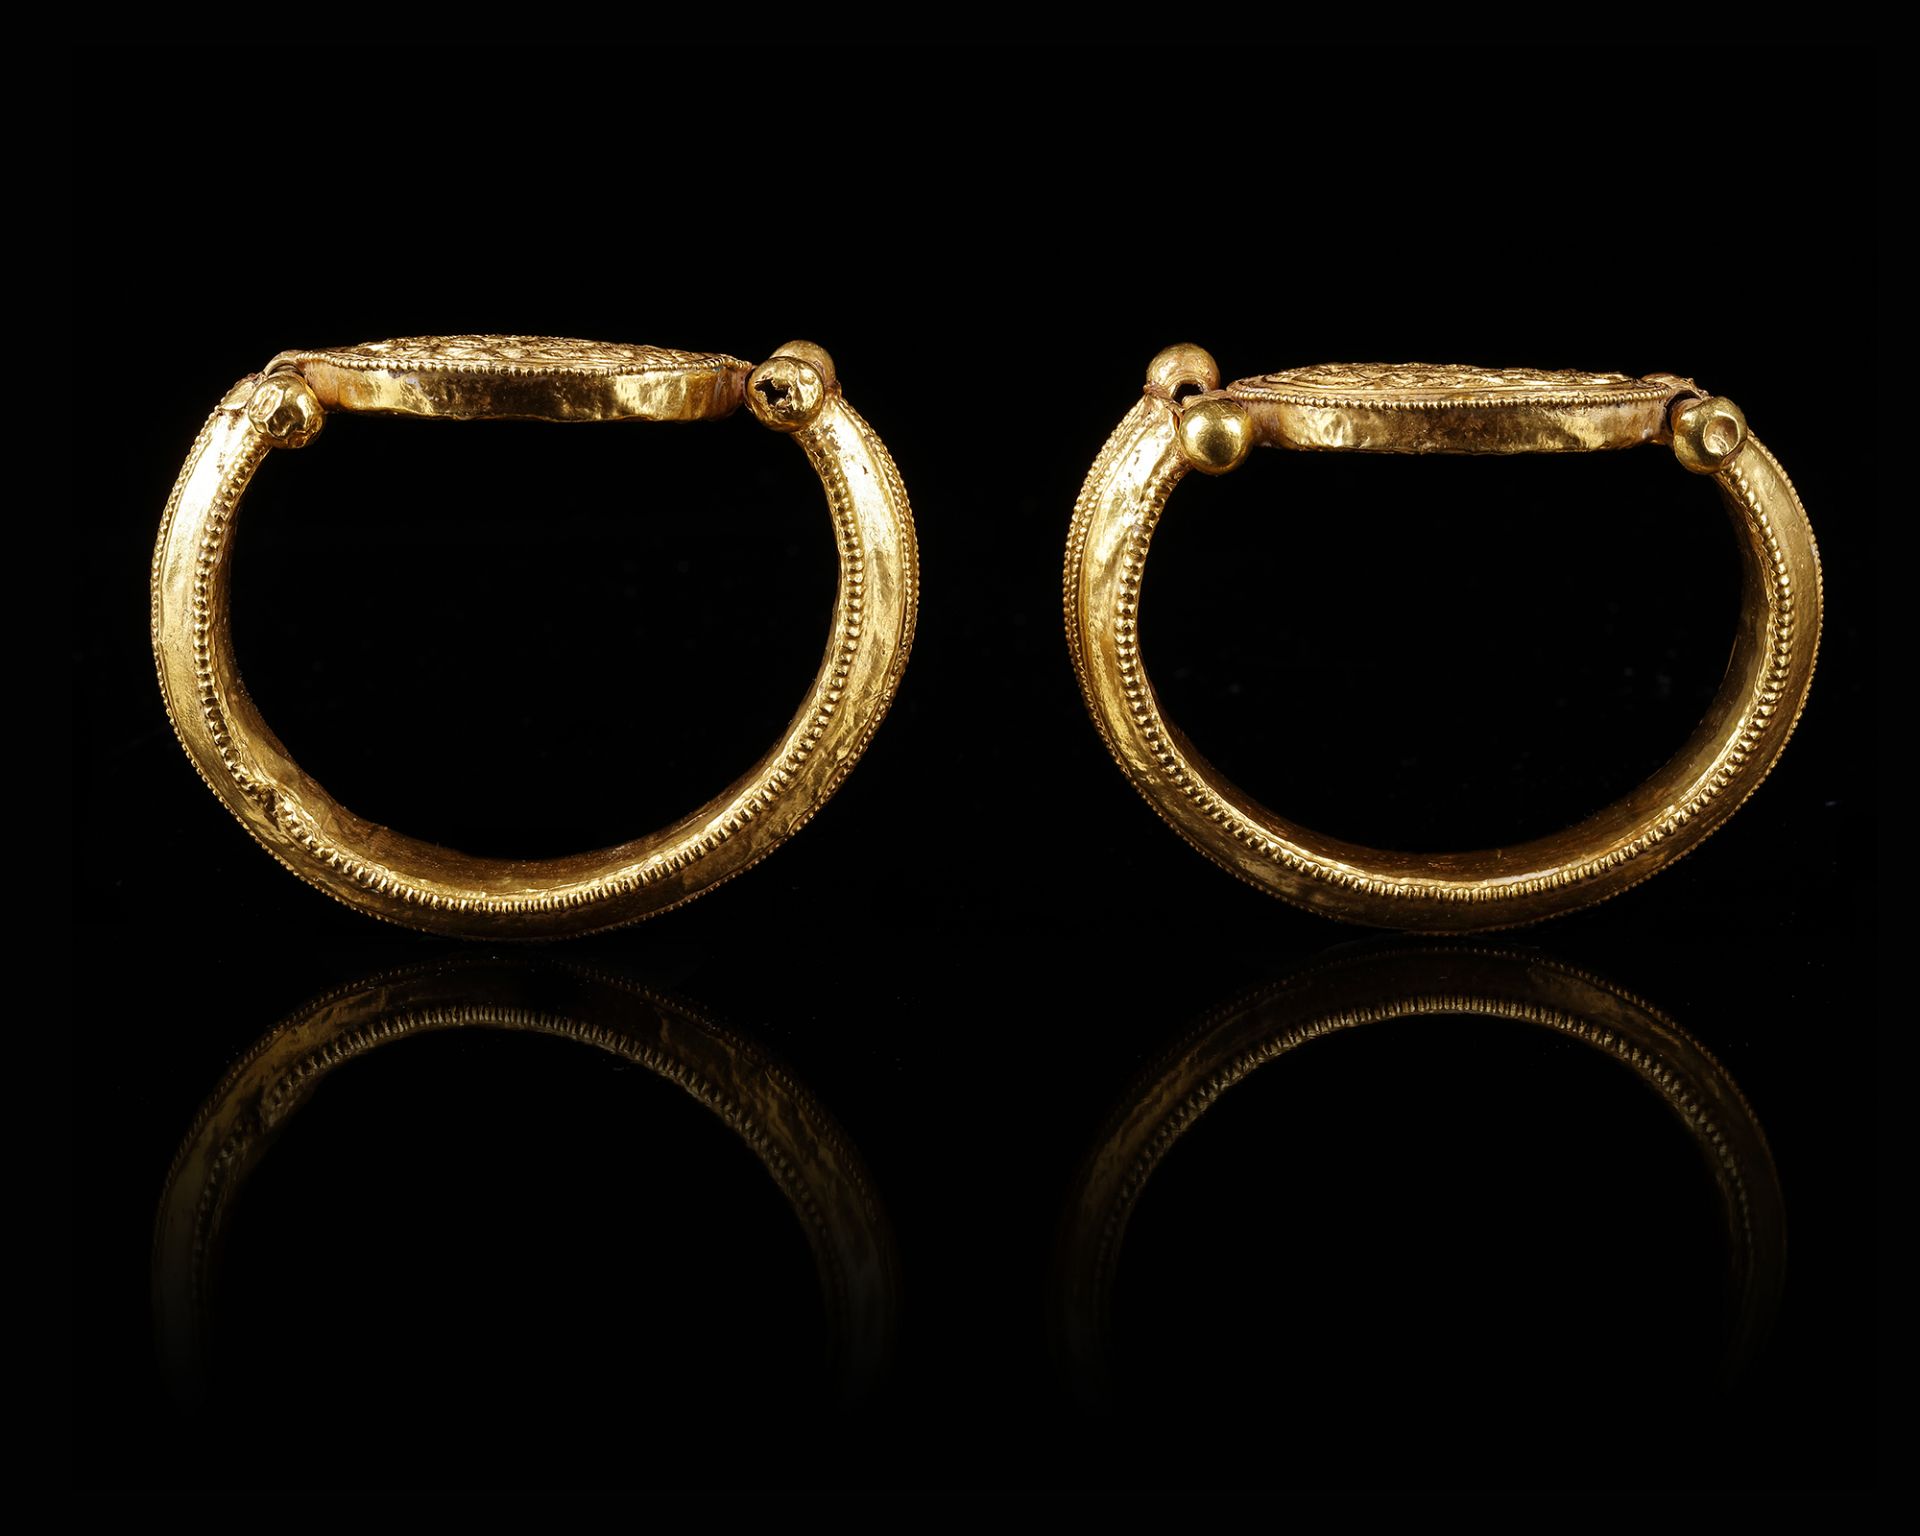 A RARE PAIR OF A FATIMID GOLD BRACELETS, POSSIBLY SYRIA, 11TH CENTURY - Image 14 of 14